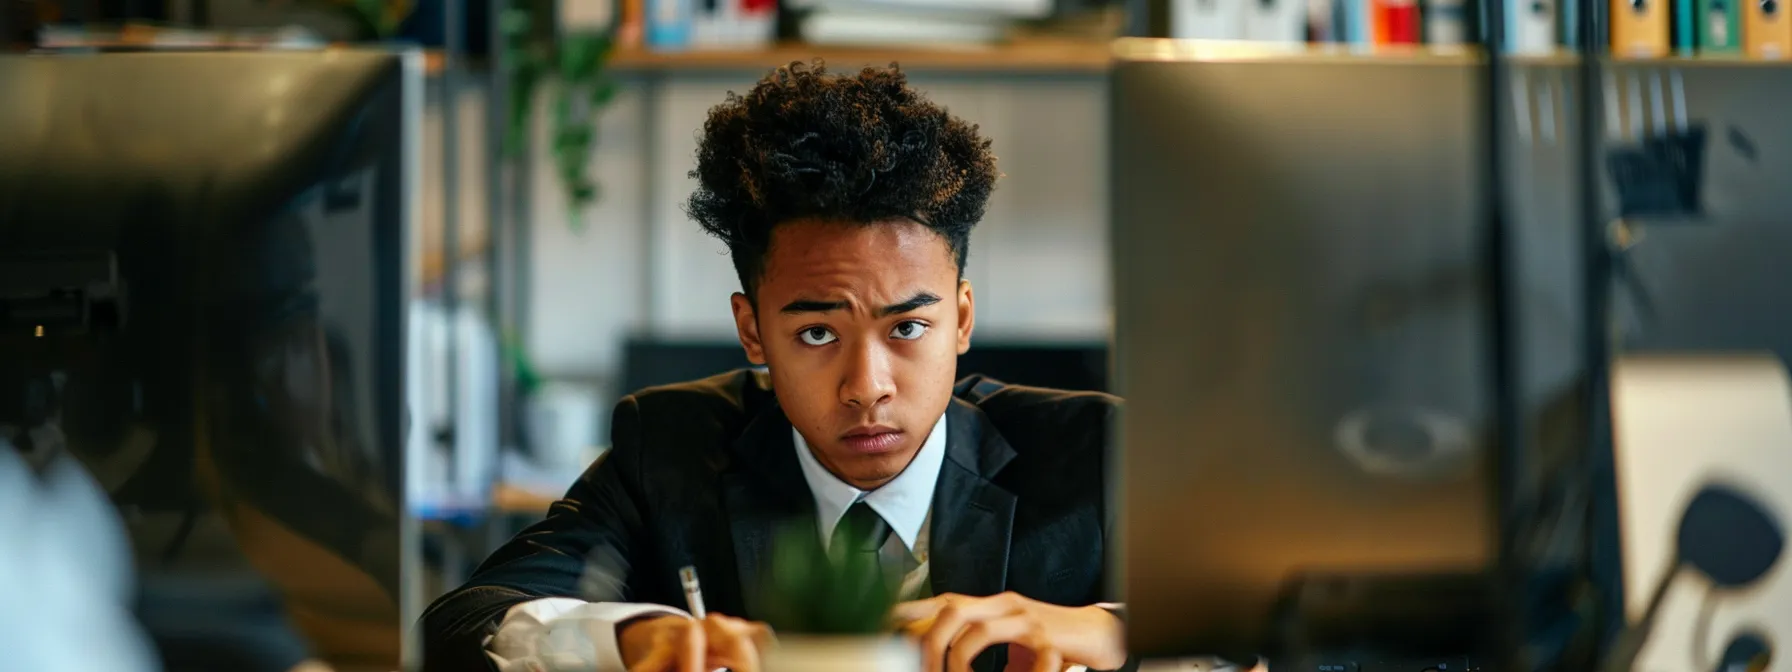 a person in an office wearing a suit and looking intently at their computer screen with a serious expression.